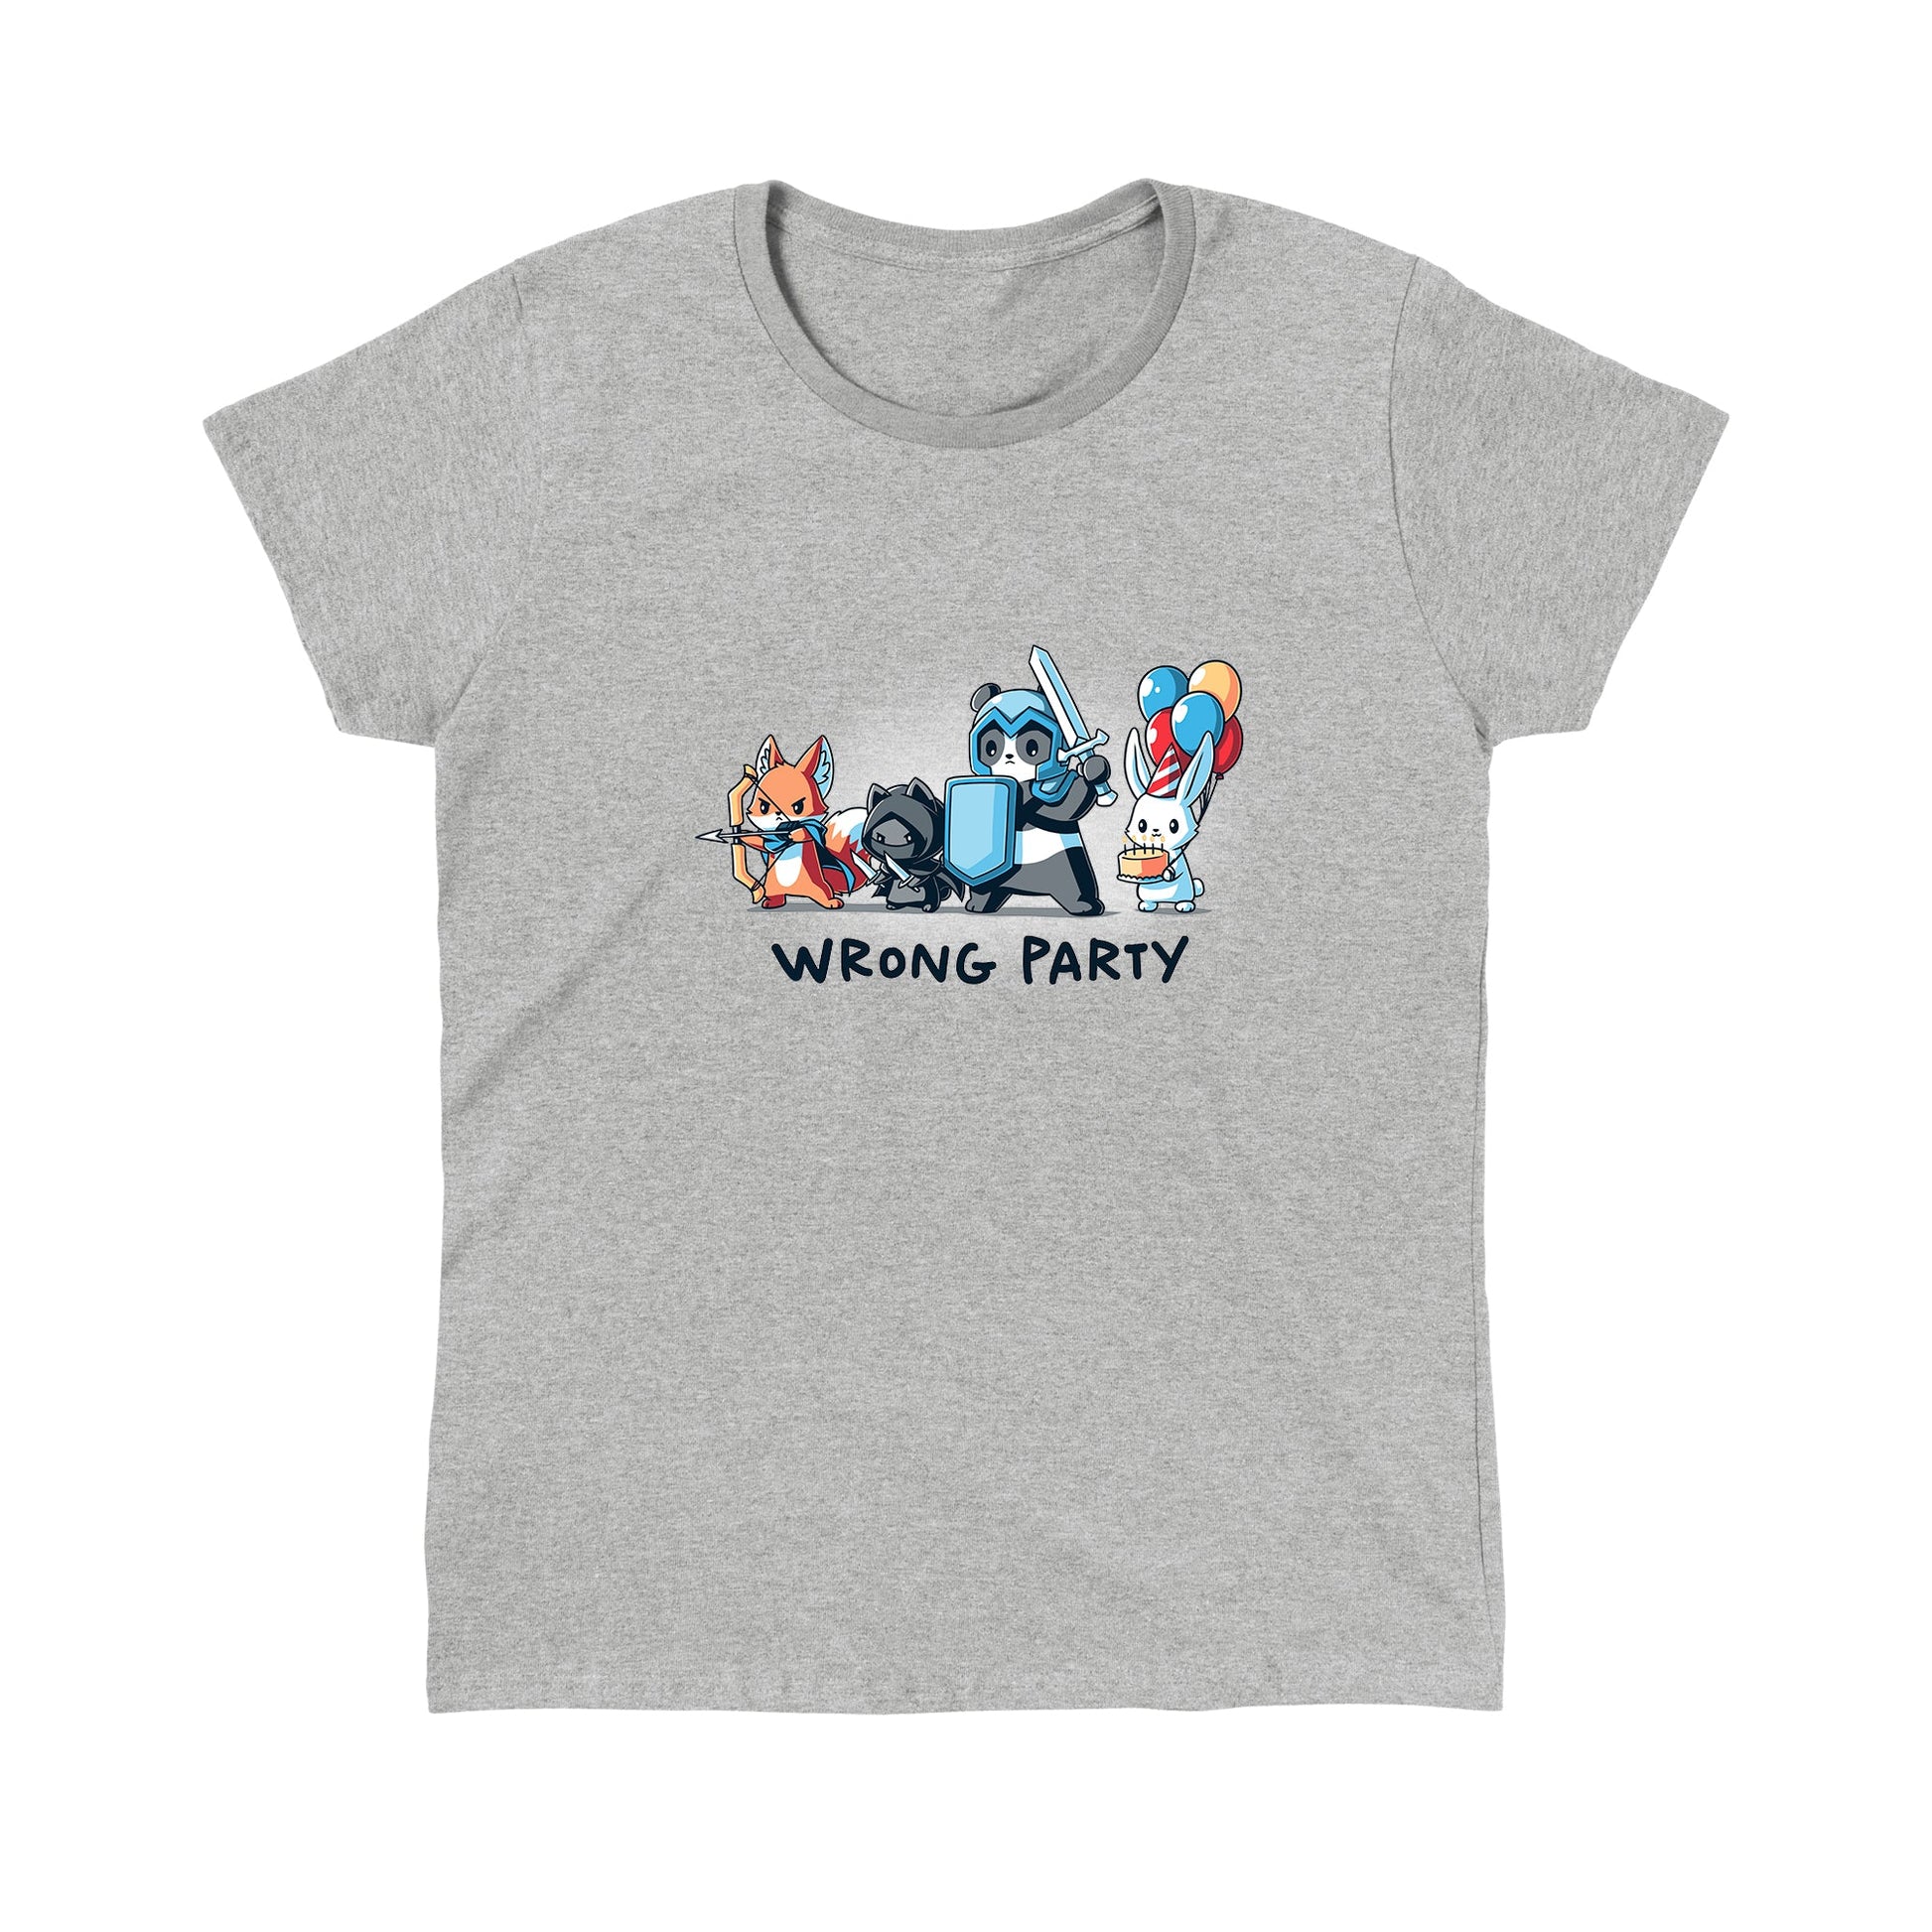 Classic Cotton T-shirt_A group of cartoon animals dressed as an archer fox, ninja cat, knight panda, and a rabbit holding balloons and cake. Text below reads "WRONG PARTY." This whimsical scene is printed on a monsterdigital Wrong Party apparel made from super soft ringspun cotton. Unisex apparelavailable.